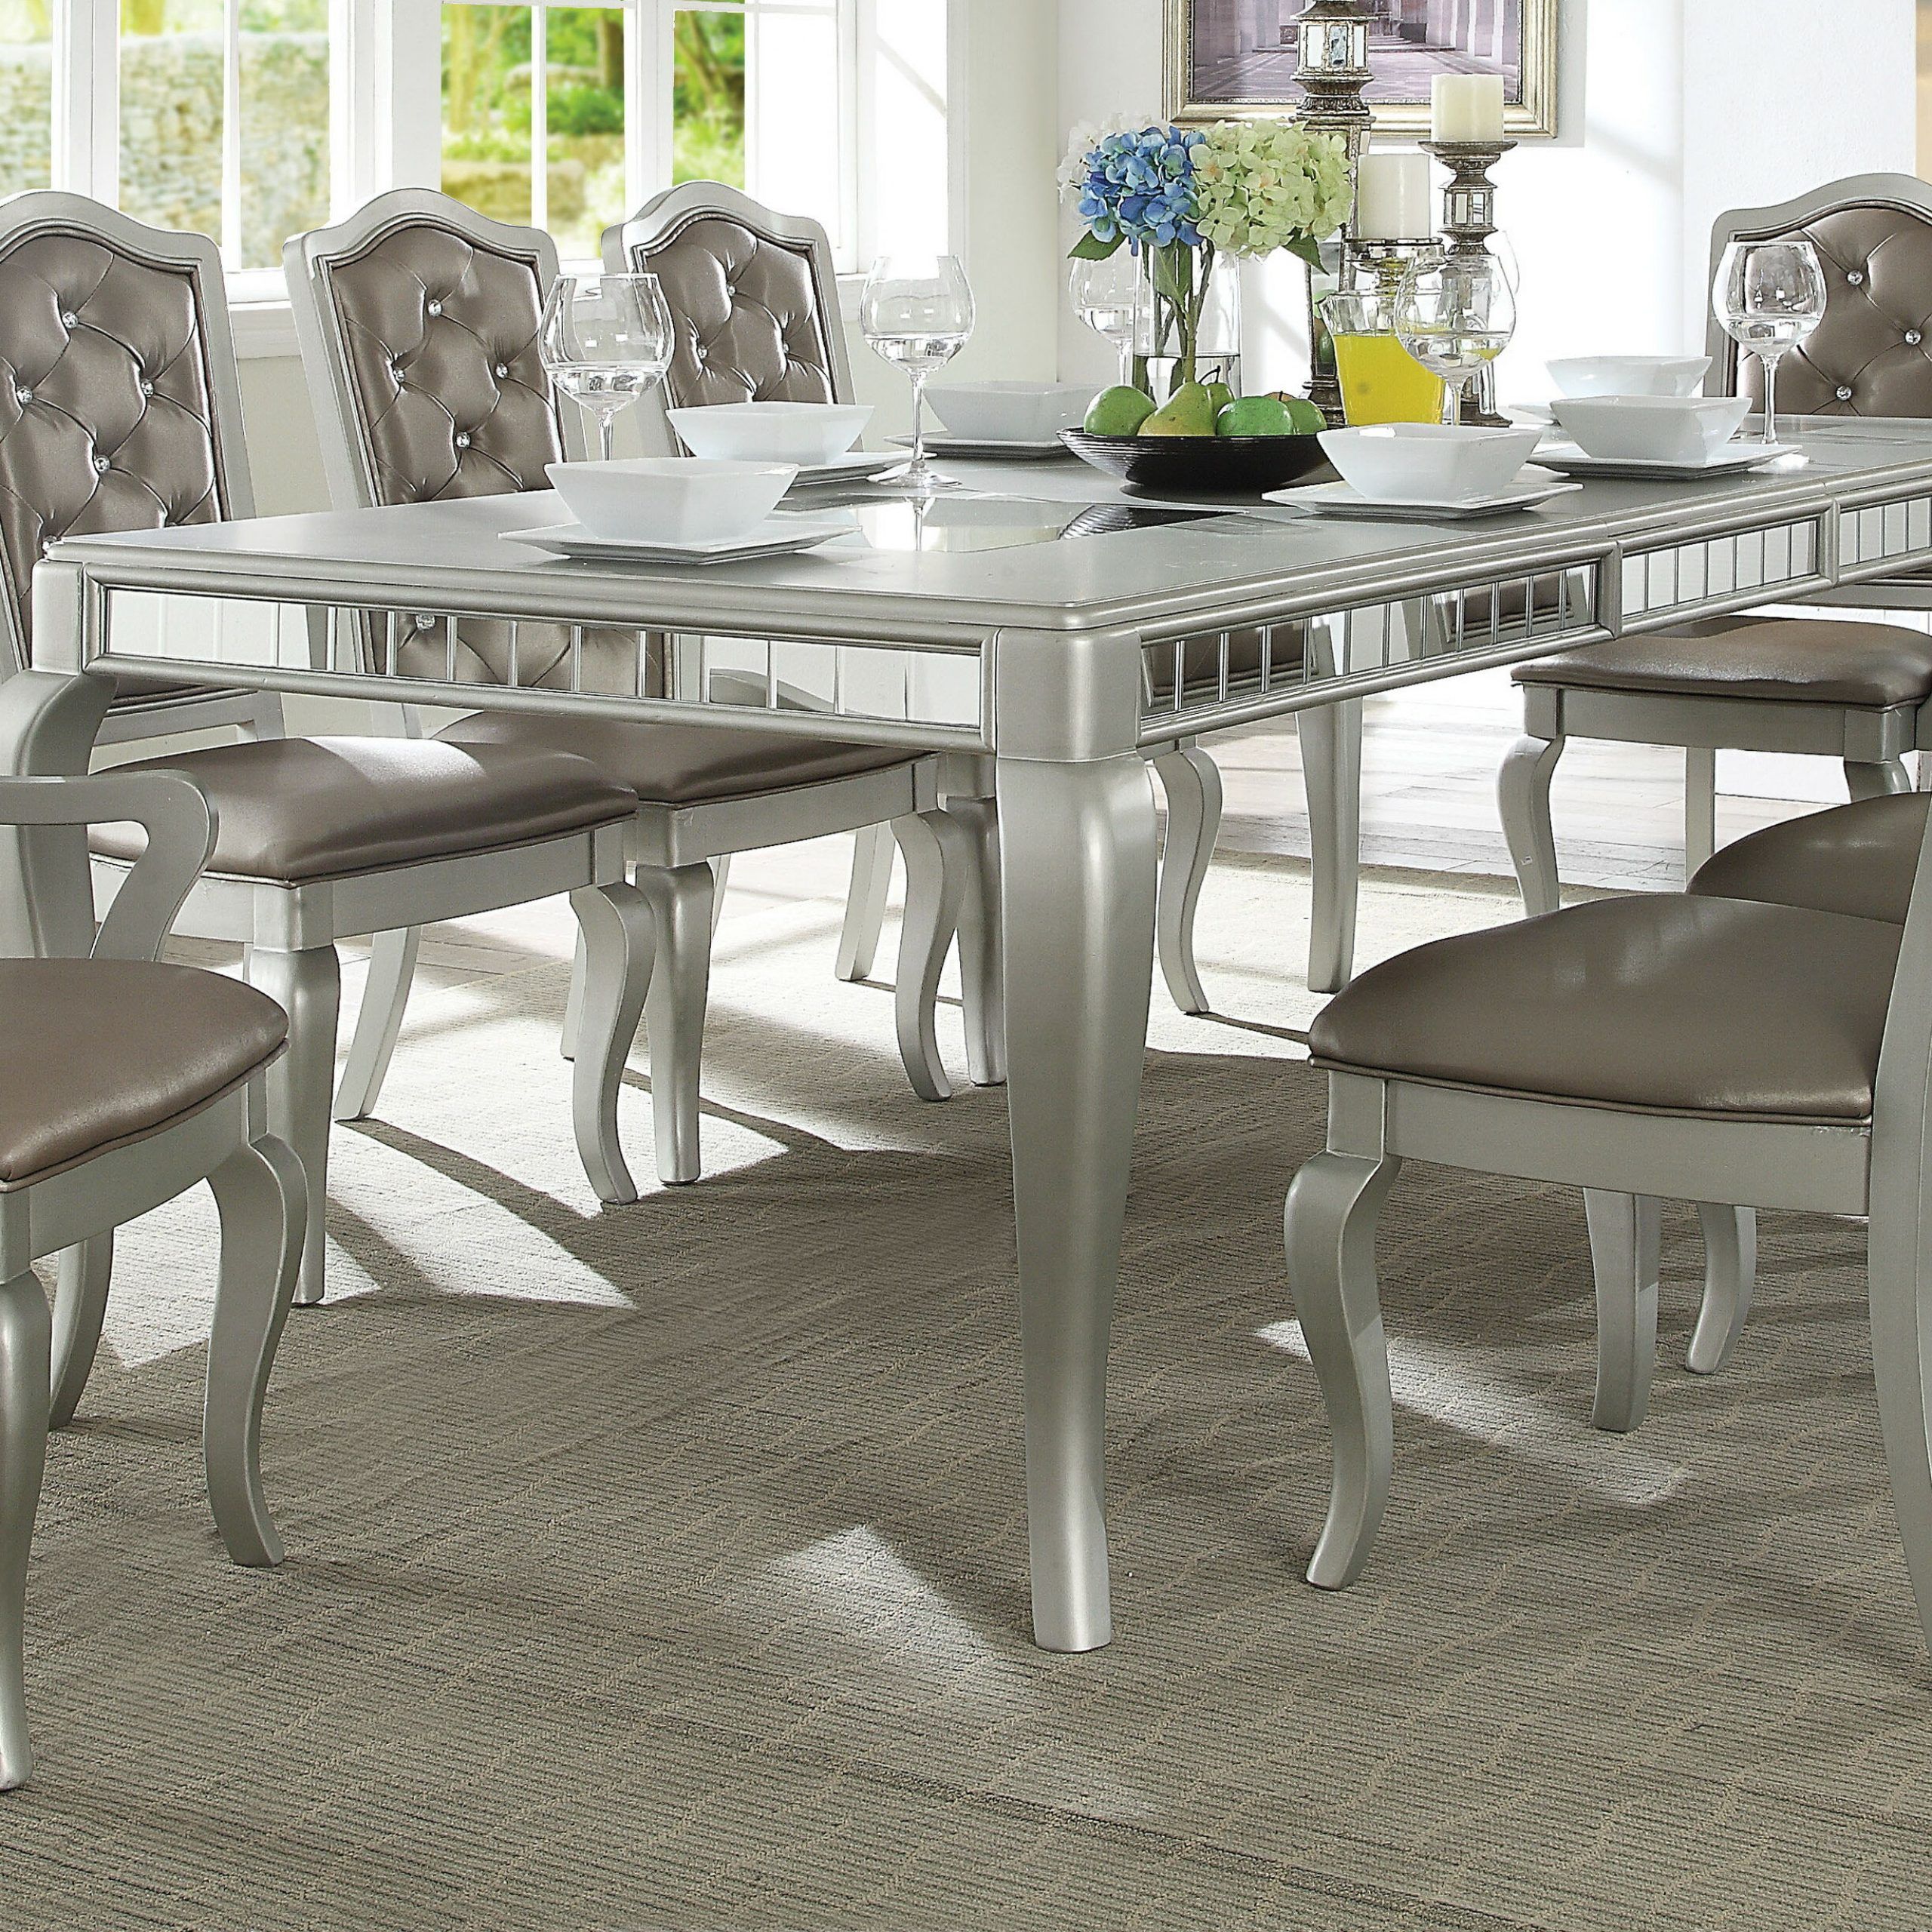 Most Recent Dawson 9 Piece Extendable Dining Set Pertaining To Dawson Pedestal Dining Tables (View 23 of 25)